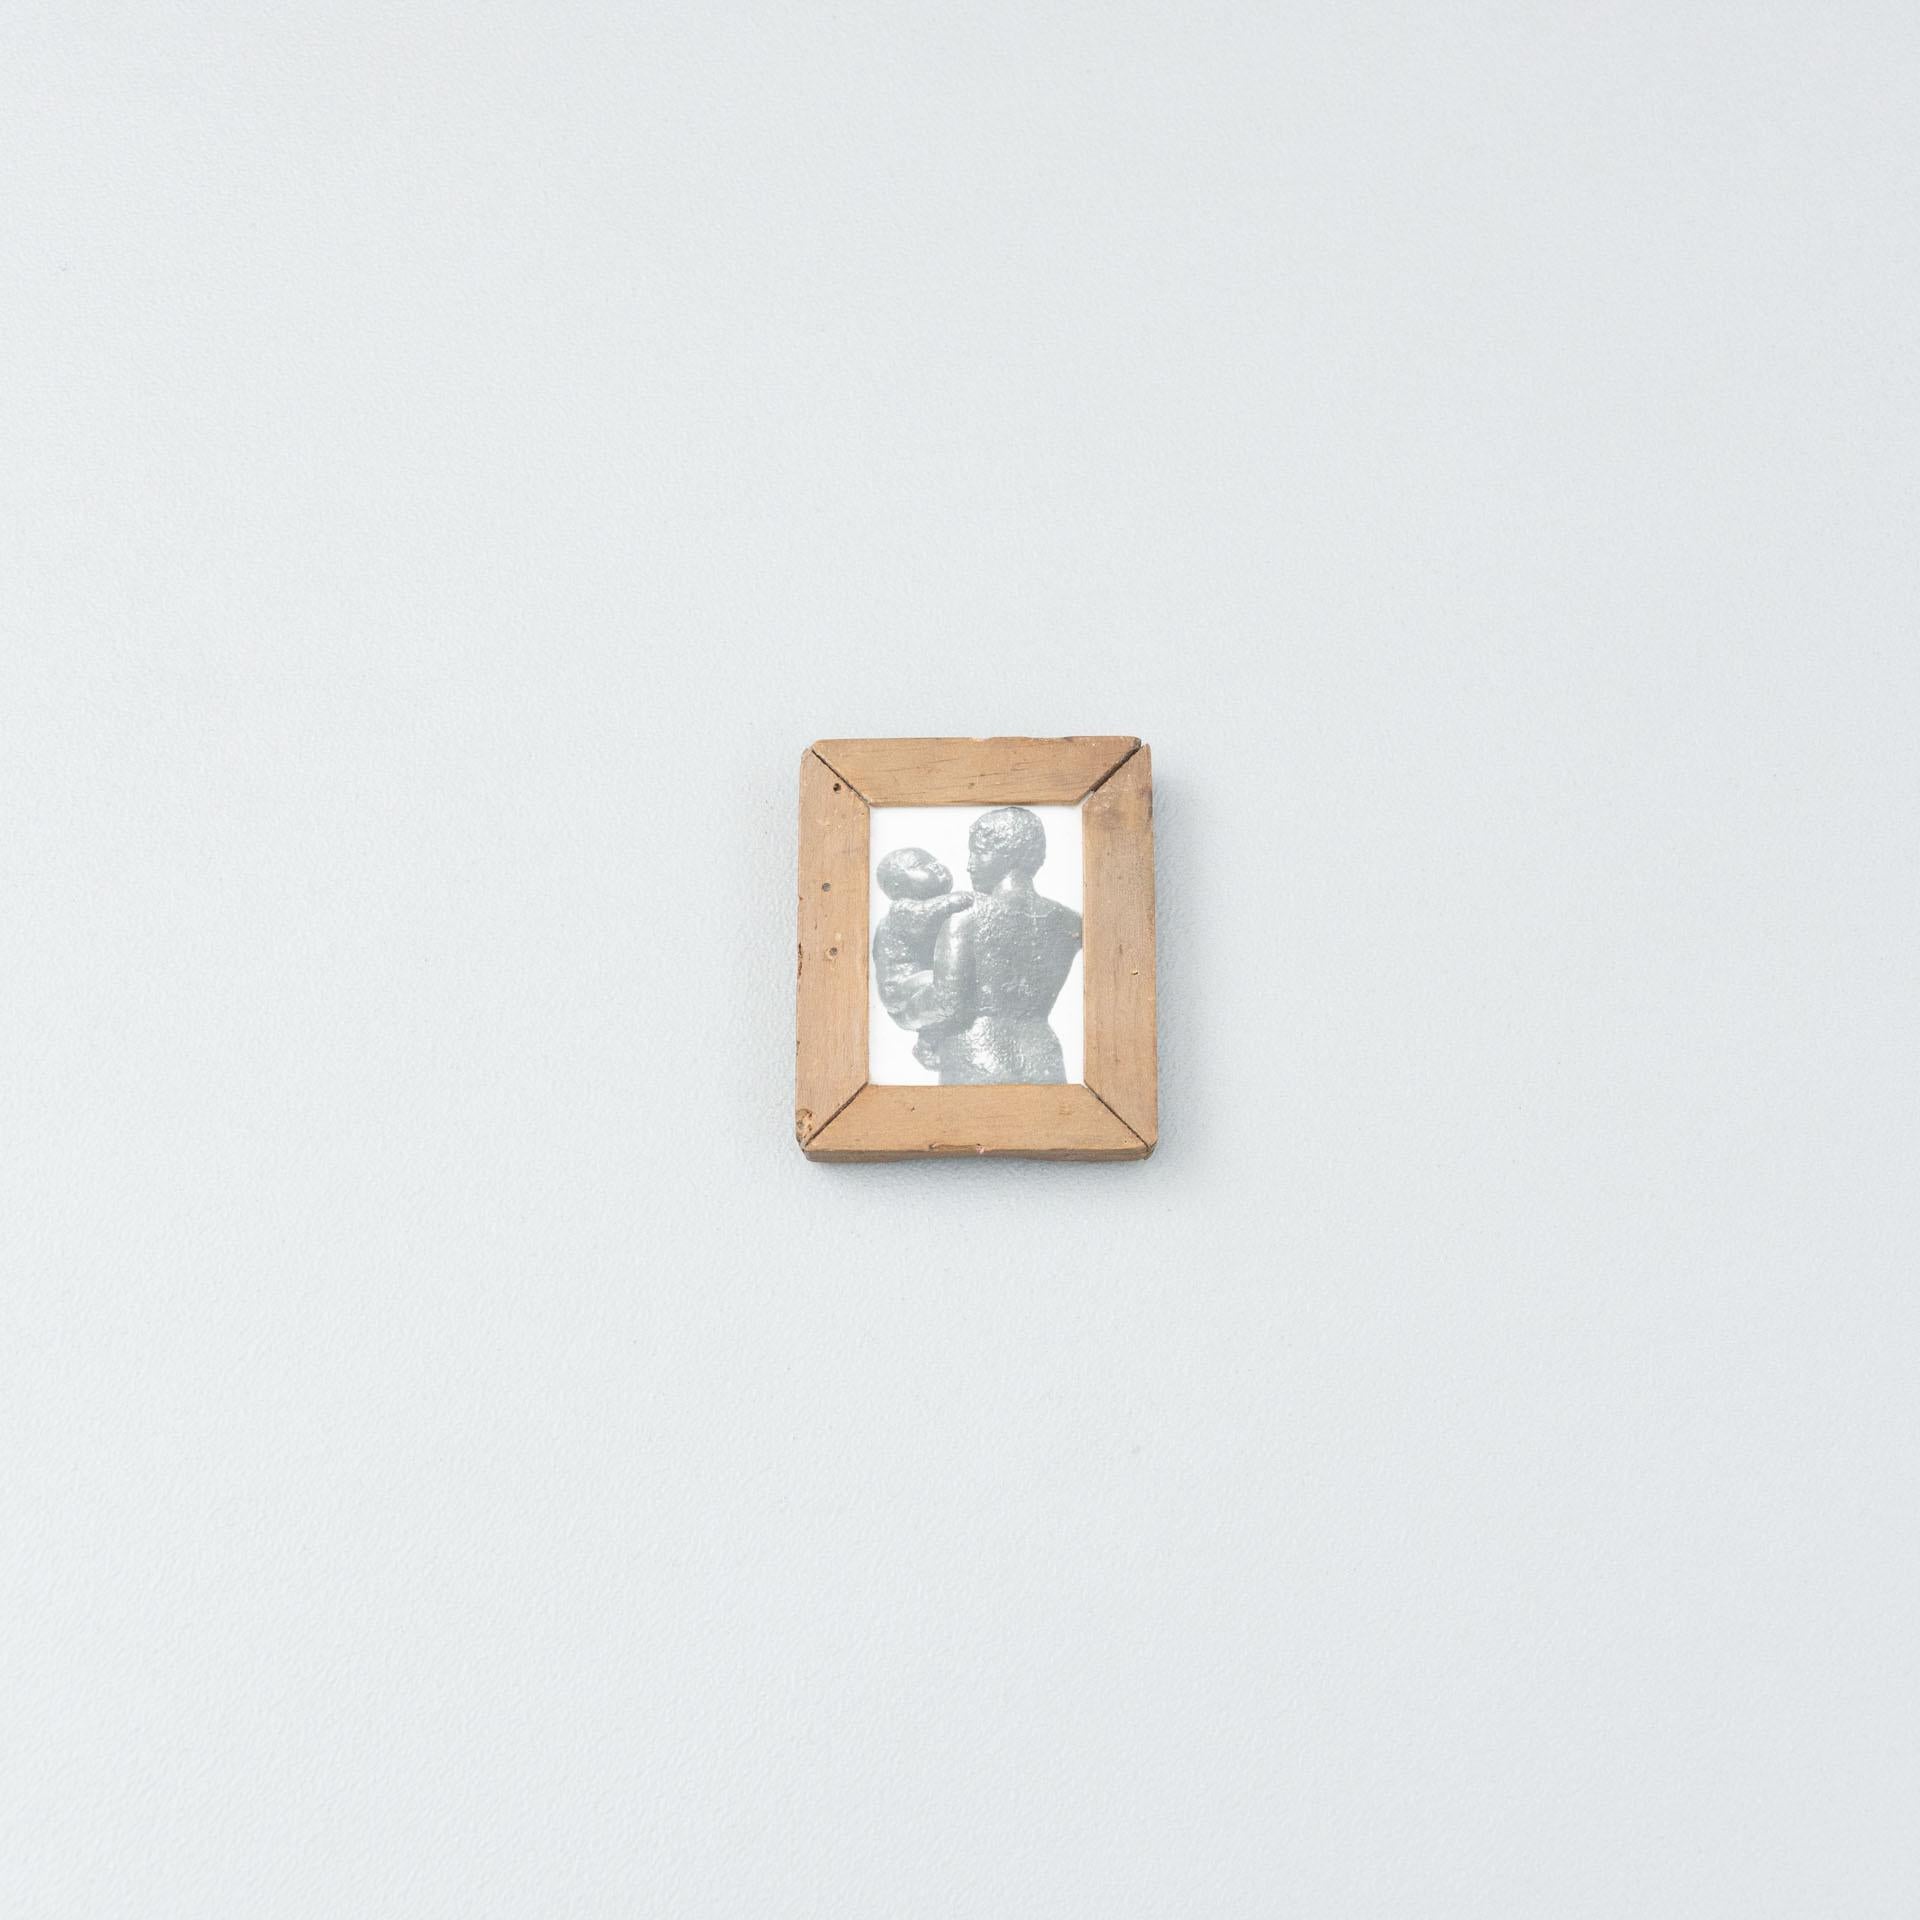 Manolo Hugué archive photography of sculpture.
Printed, circa 1960.
Wood frame included.


Materials:
Gelatin silver bromide print

Dimensions:
D 1.5 cm x W 6.8 cm x H 8.3 cm

We offer free worldwide shipping for this piece.